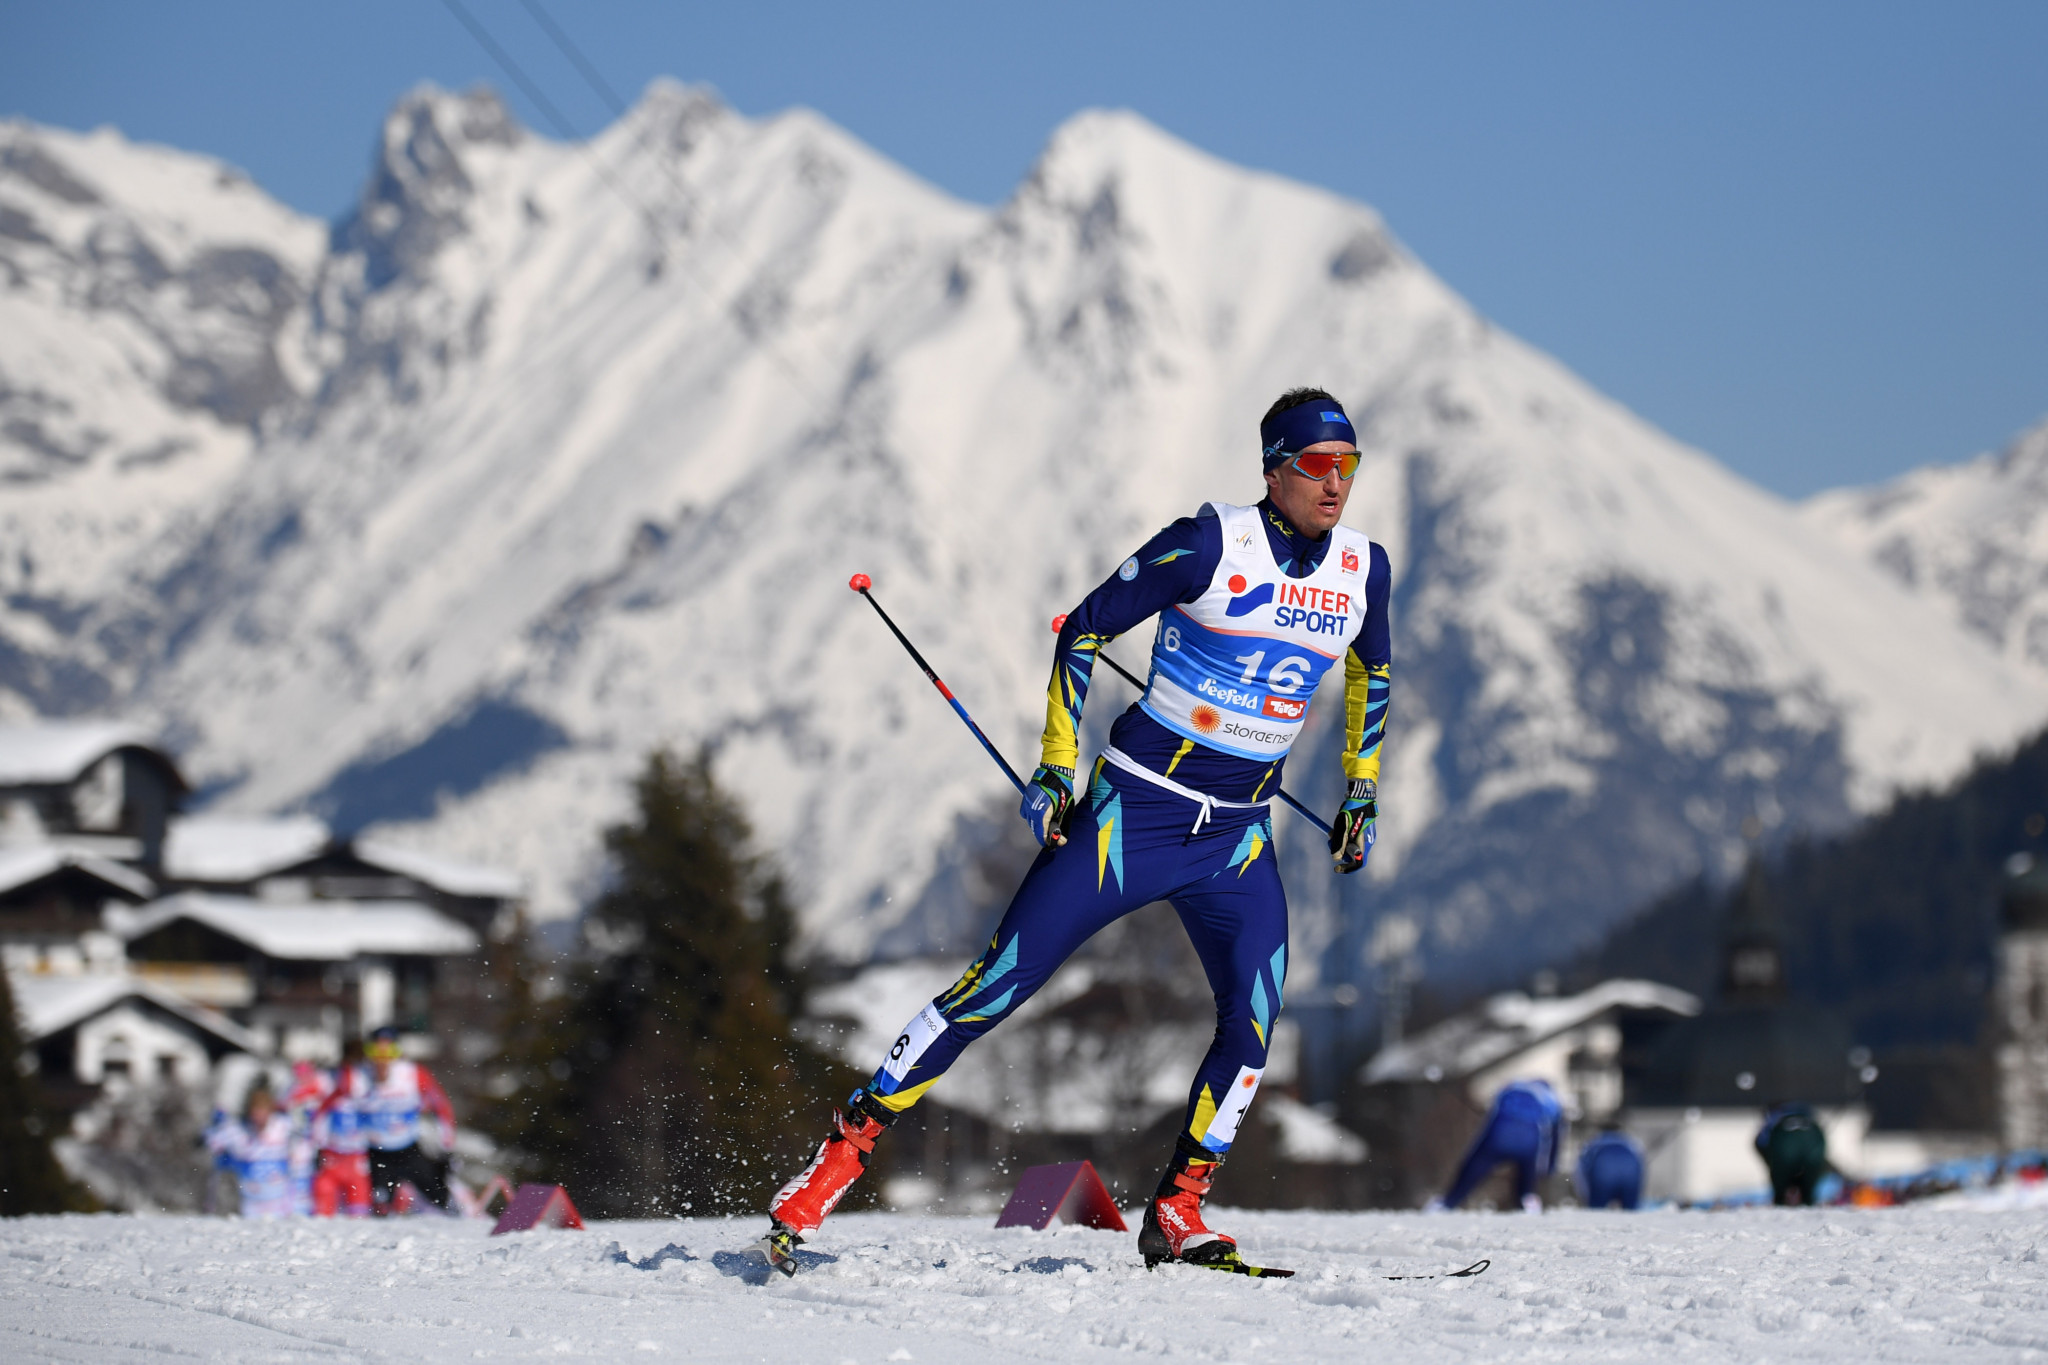 Kazakhstan's Alexey Poltoranin is among the latest athletes to be banned in connection with Operation Aderlass ©Getty Images